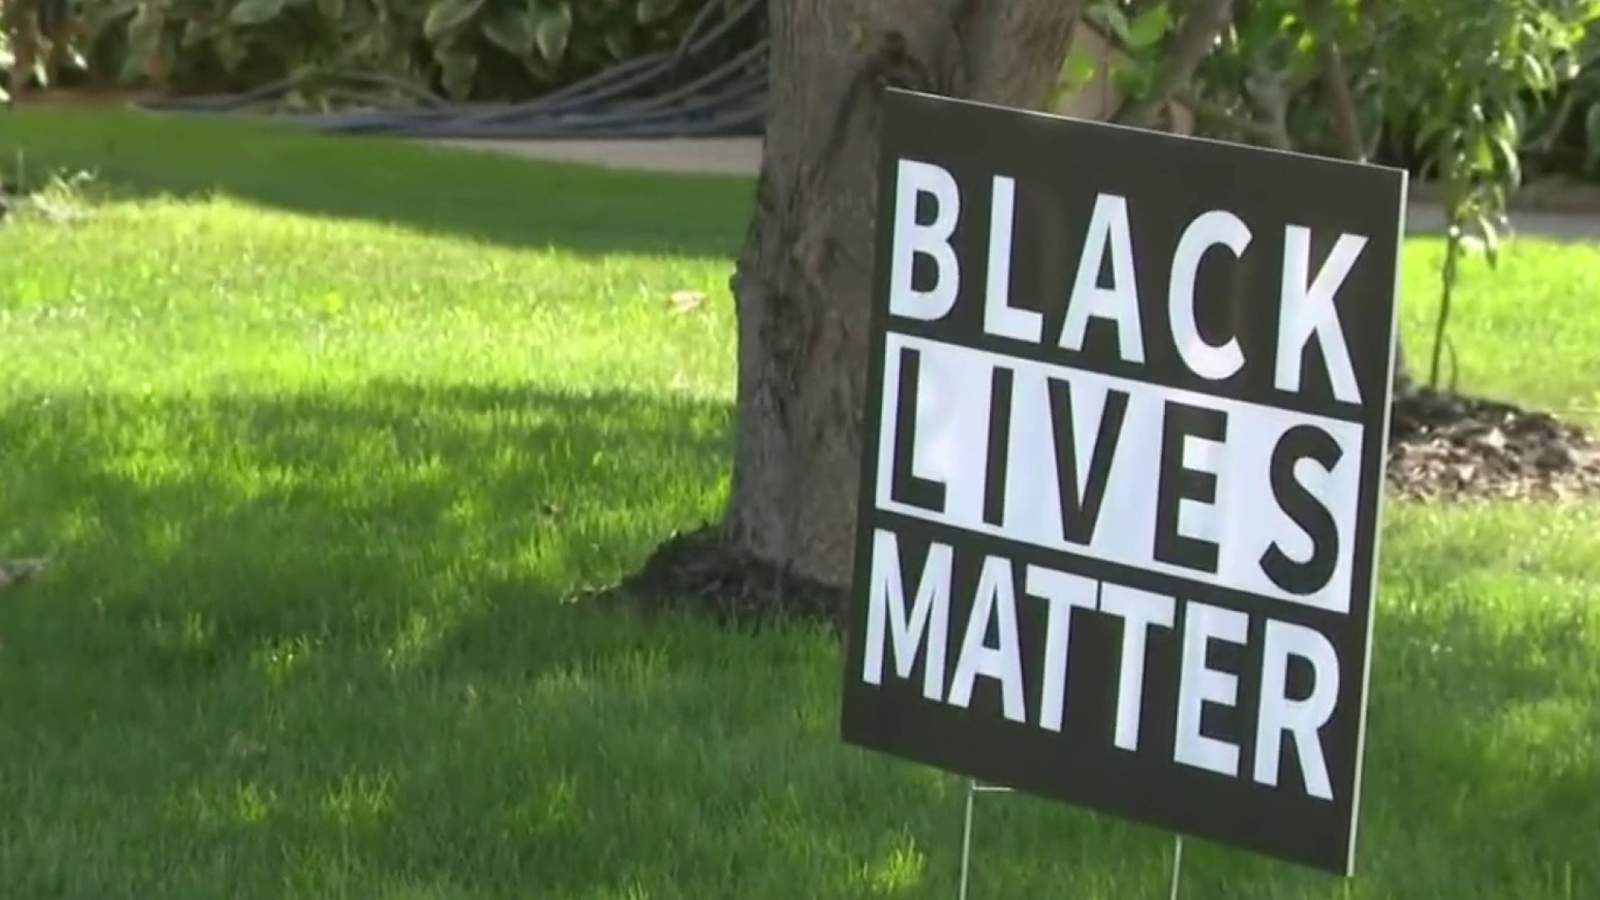 Macomb Township couple claim being singled out by HOA for Black Lives Matter sign